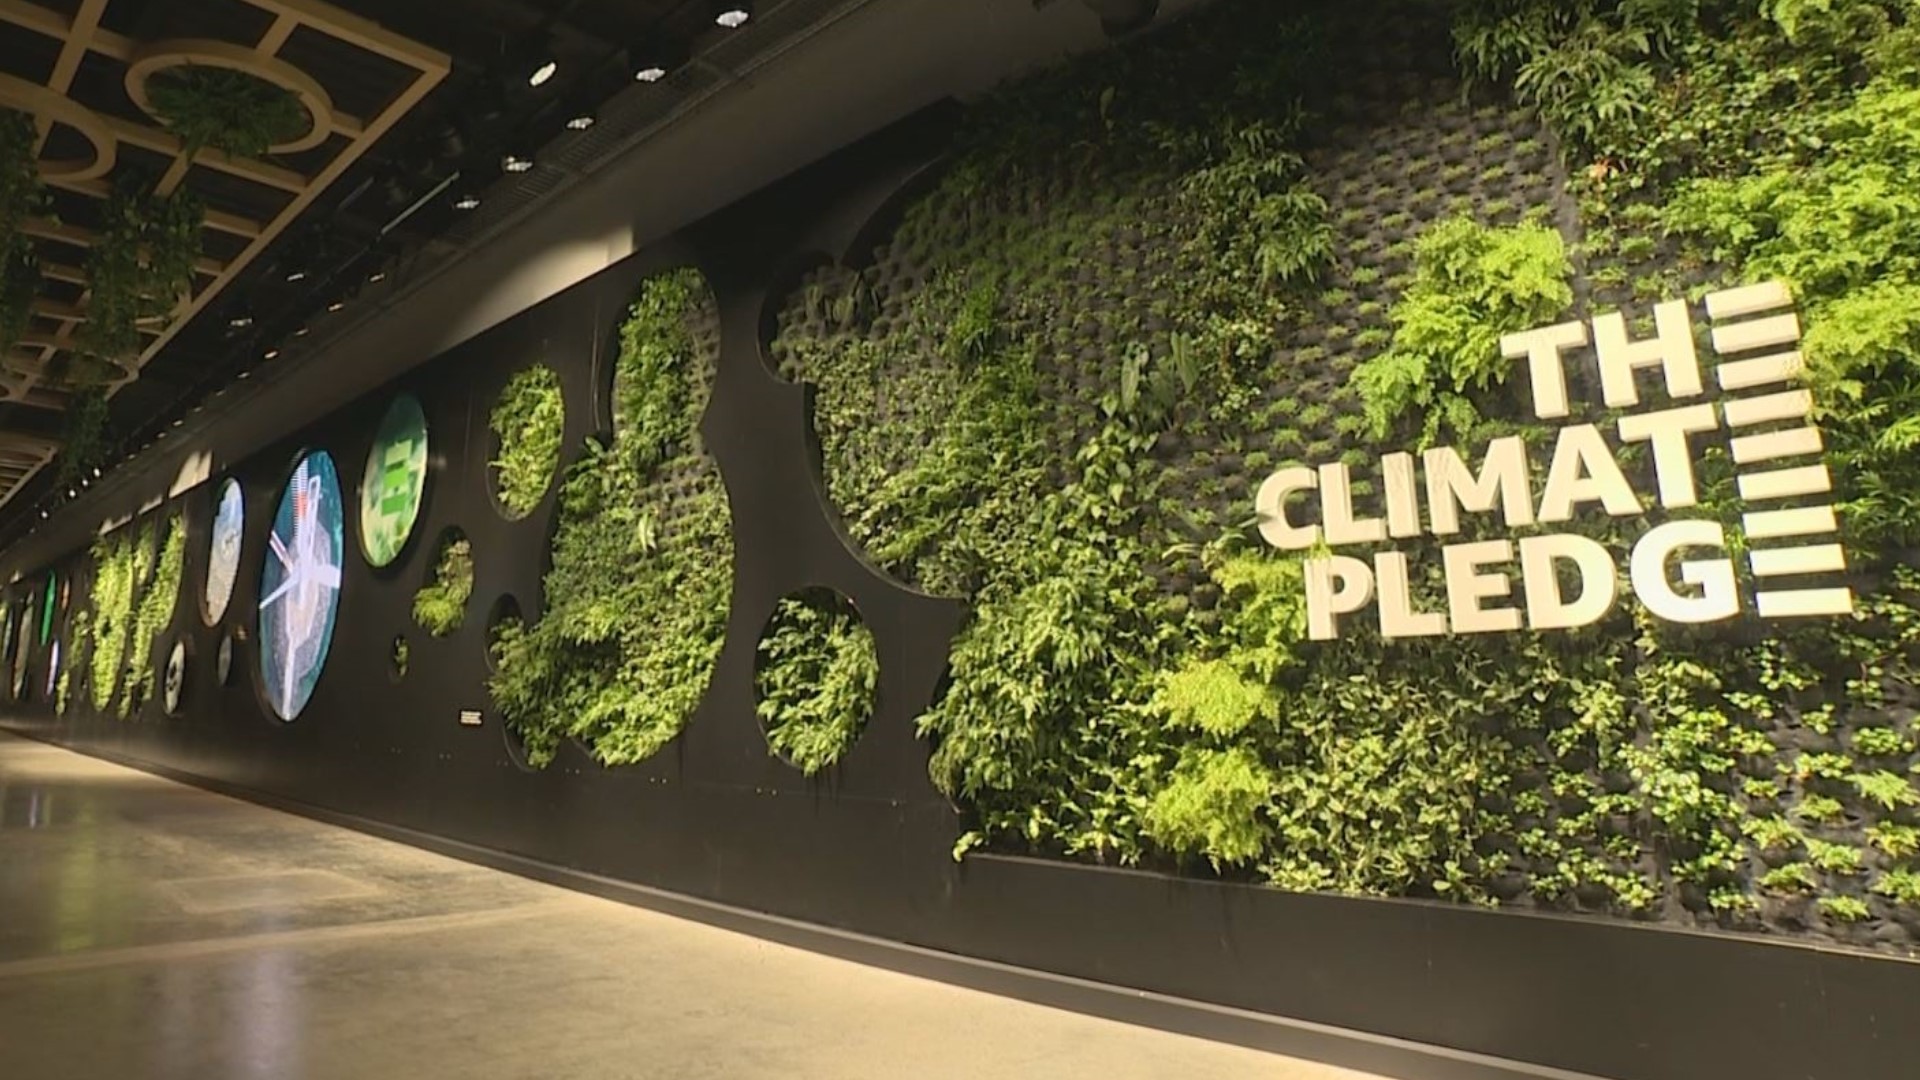 The Living Wall is Climate Pledge Arena's Most Insta-worthy spot